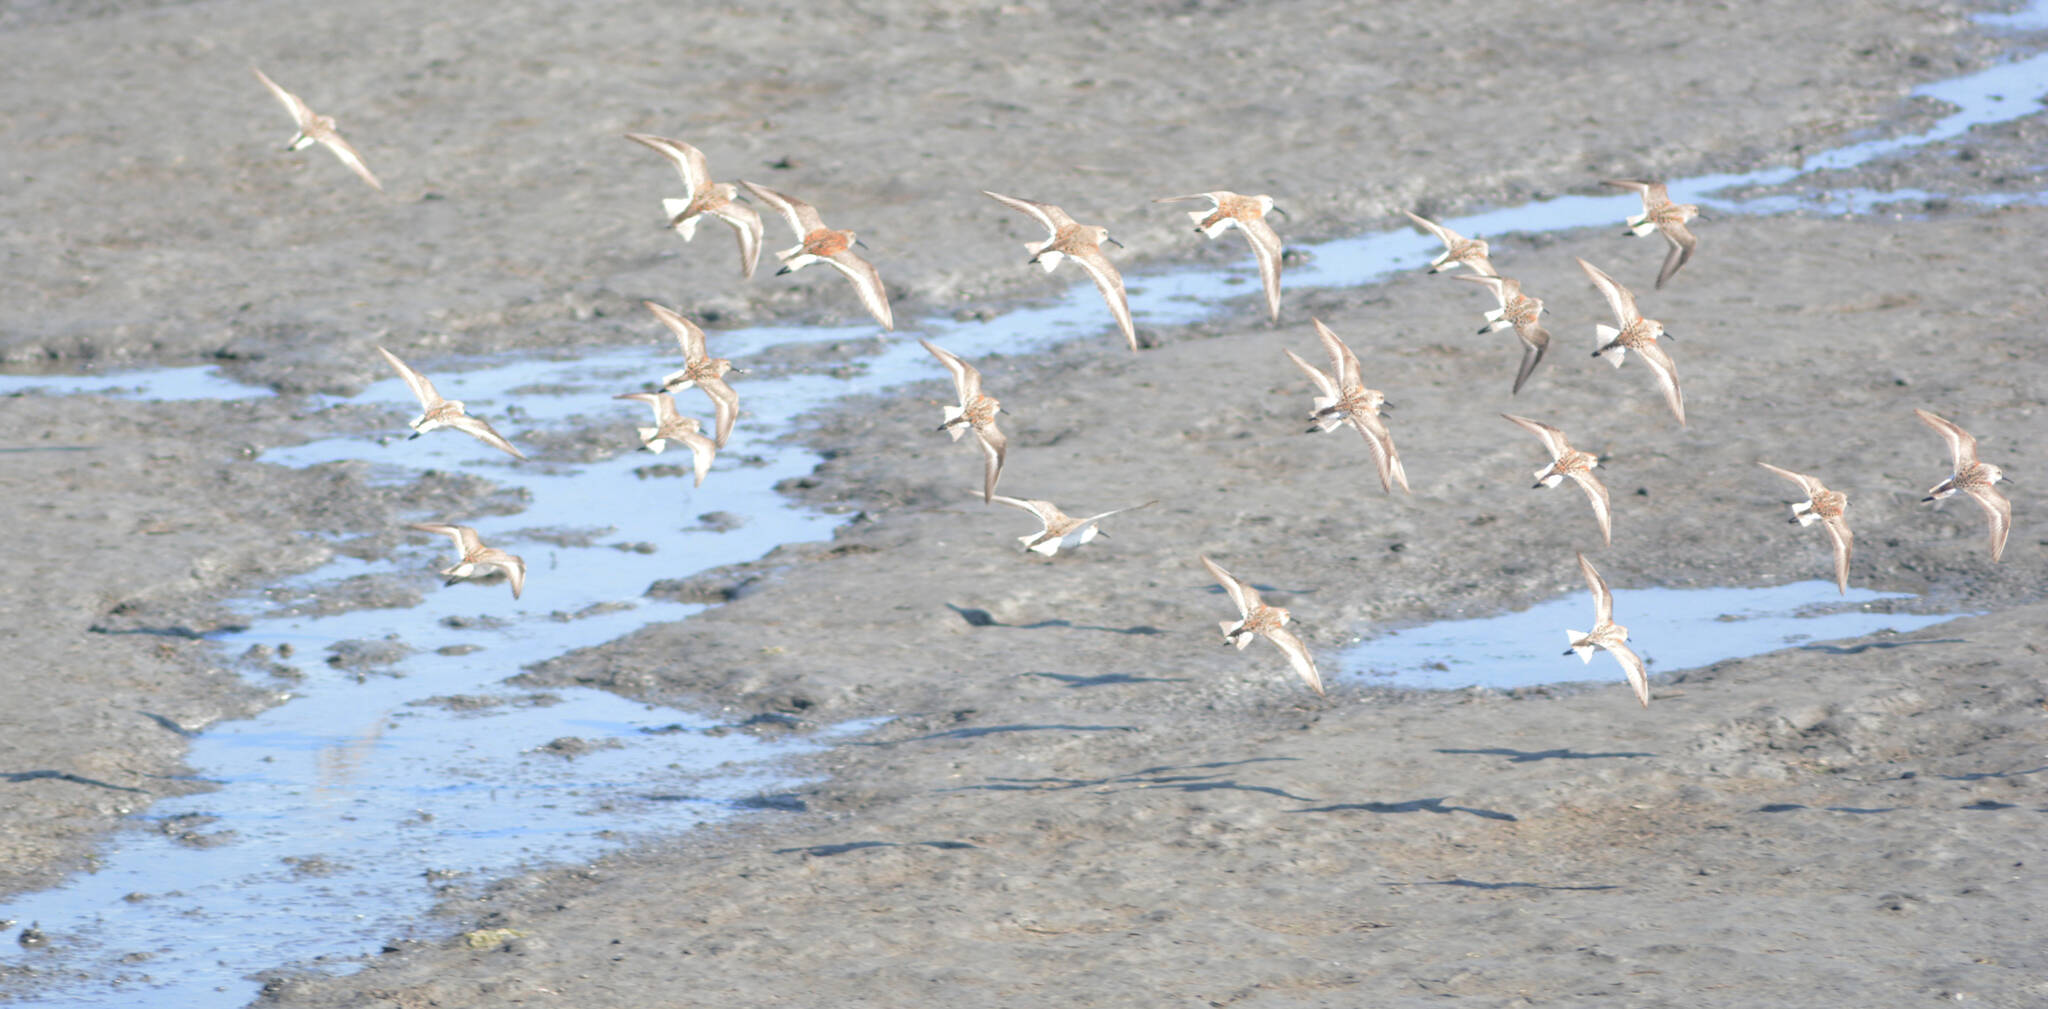 Shorebirds fly over Mud Bay on Tuesday, May 10, 2022, in Homer, Alaska. Shorebirds kept migrating through Homer even after the Kachemak Bay Shorebird Festival ended on Sunday, May 8, 2022. (Photo by Michael Armstrong/Homer News)